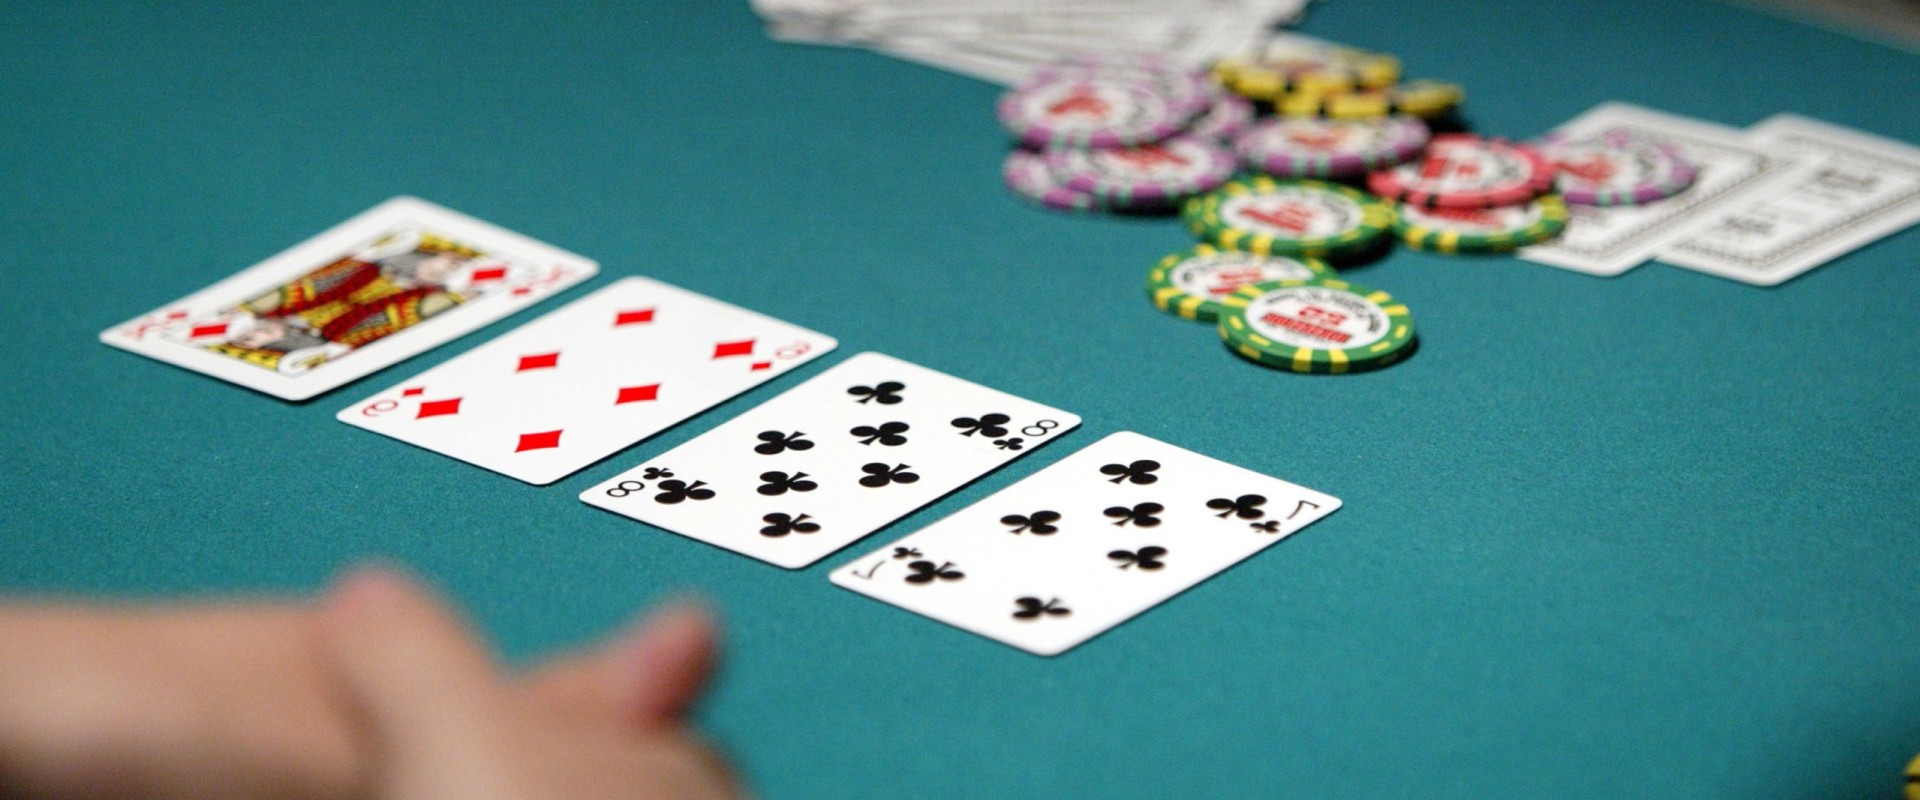 Can You Win Real Money in Online Casinos?